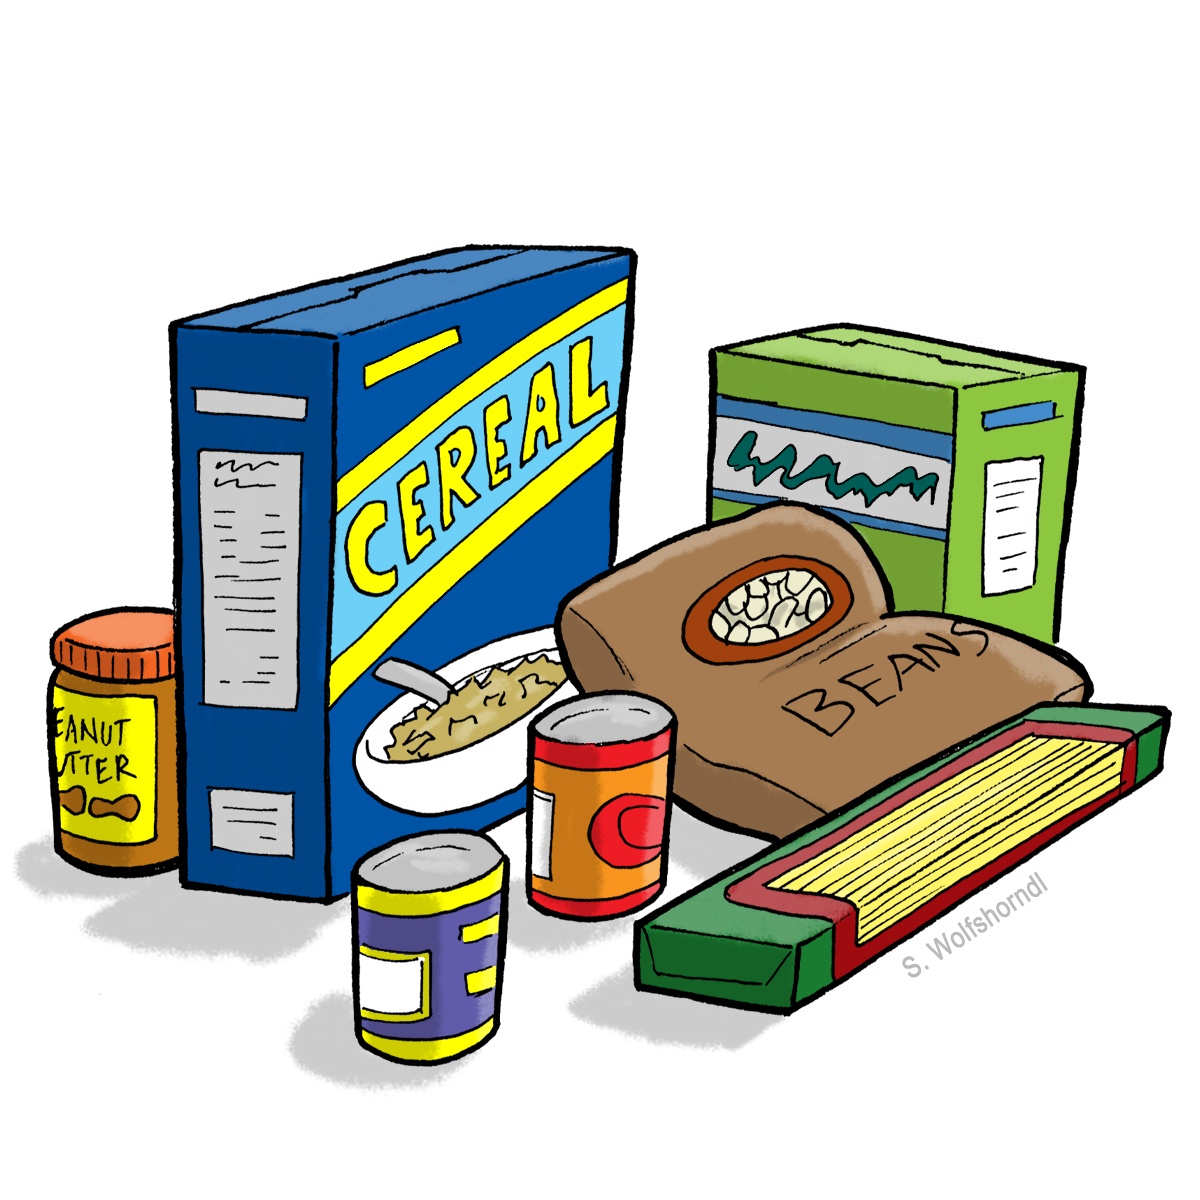 Canned Food Clipart Canned Food Clipartnon Perishable Food Clipart